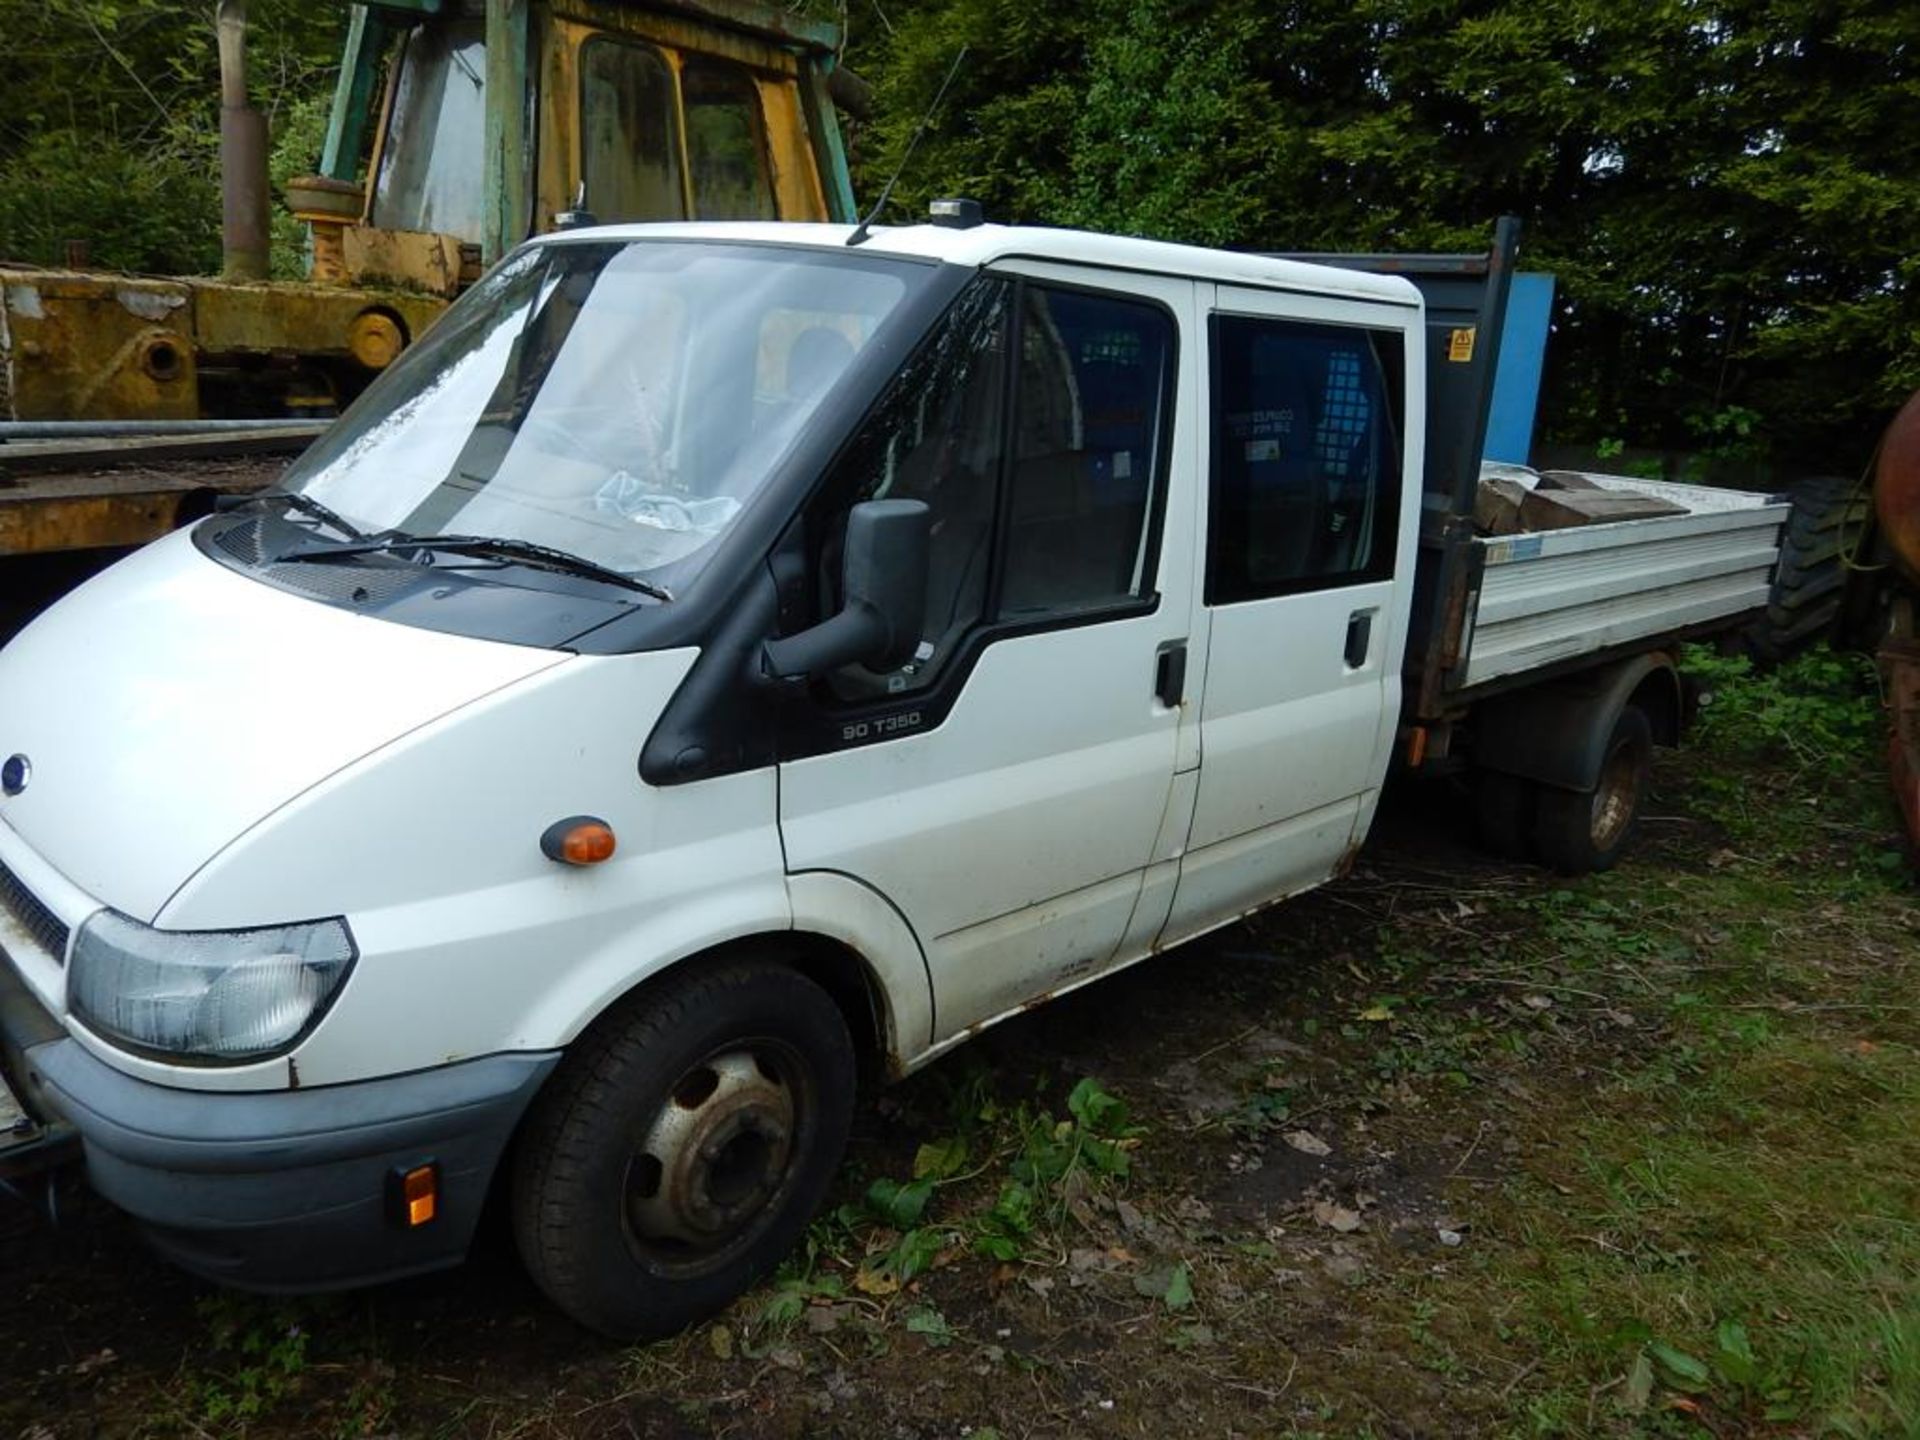 FORD Transit 90T350 diesel double cab 3 way tipper Offered for sale subject to VAT Reg. No. BP52 EWE